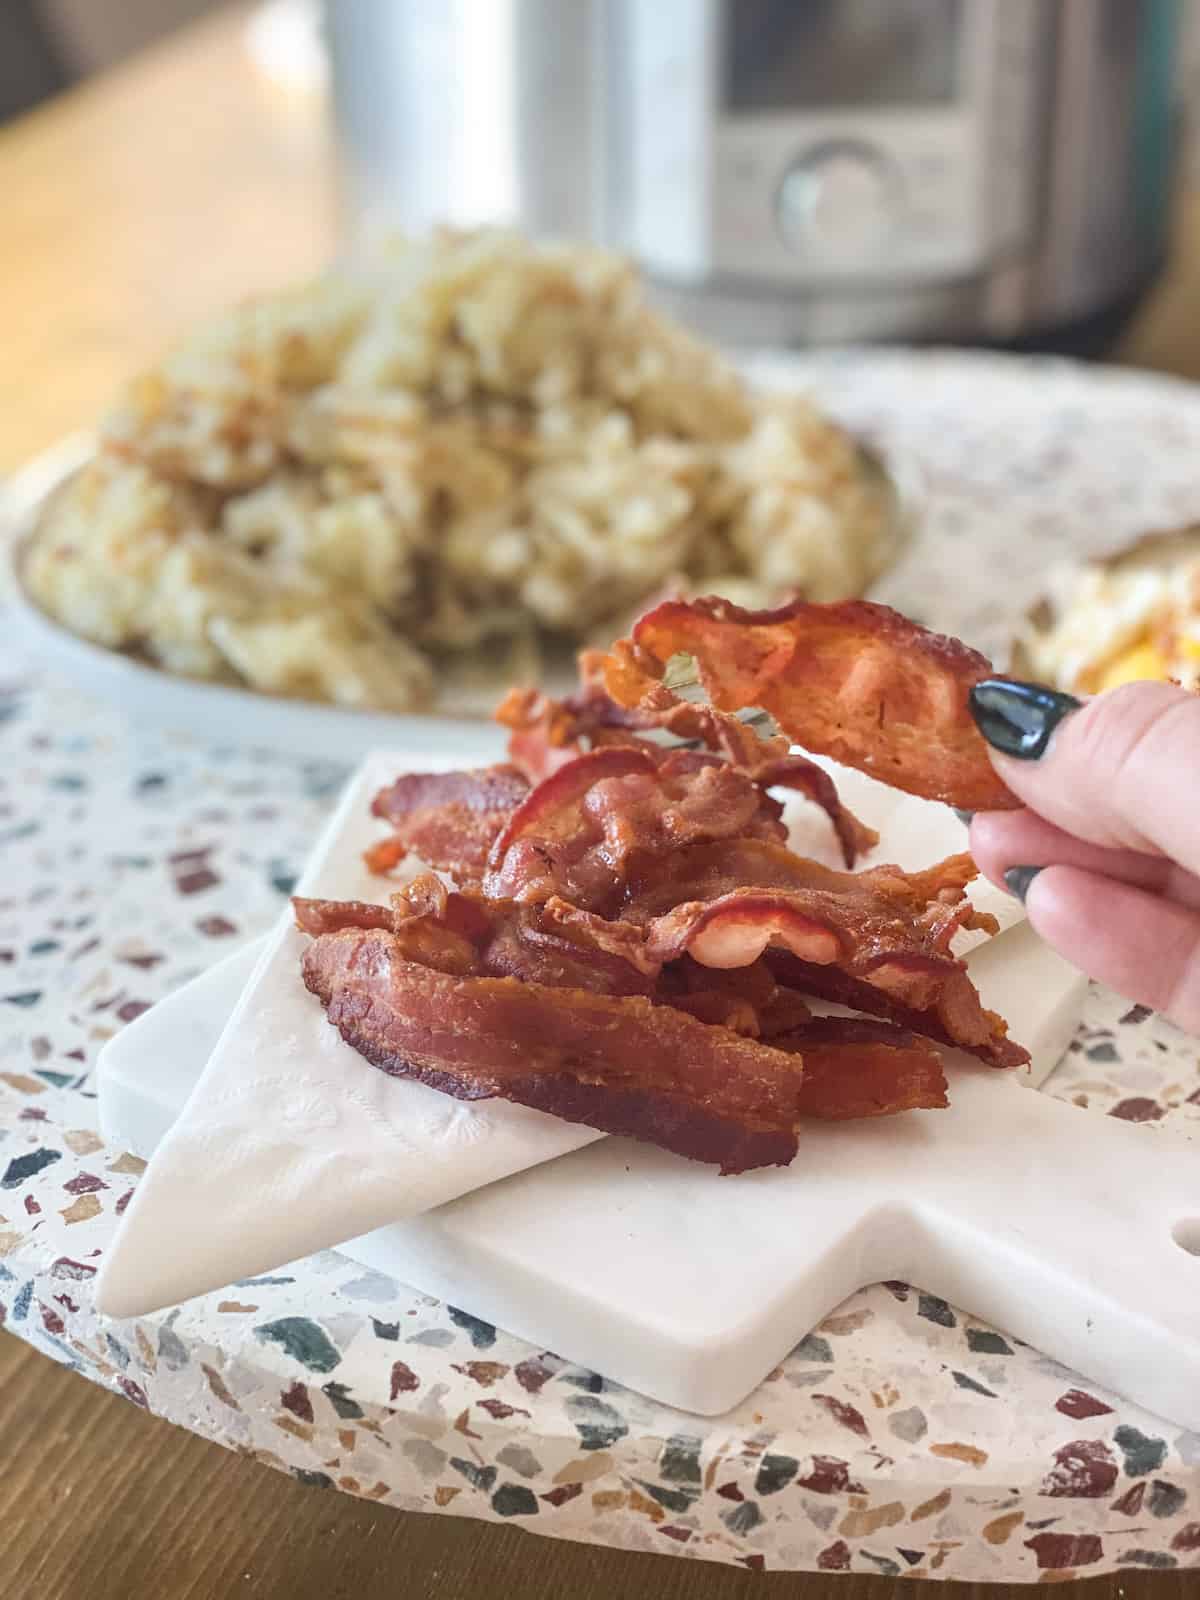 Instant Pot bacon being picked up with a hand